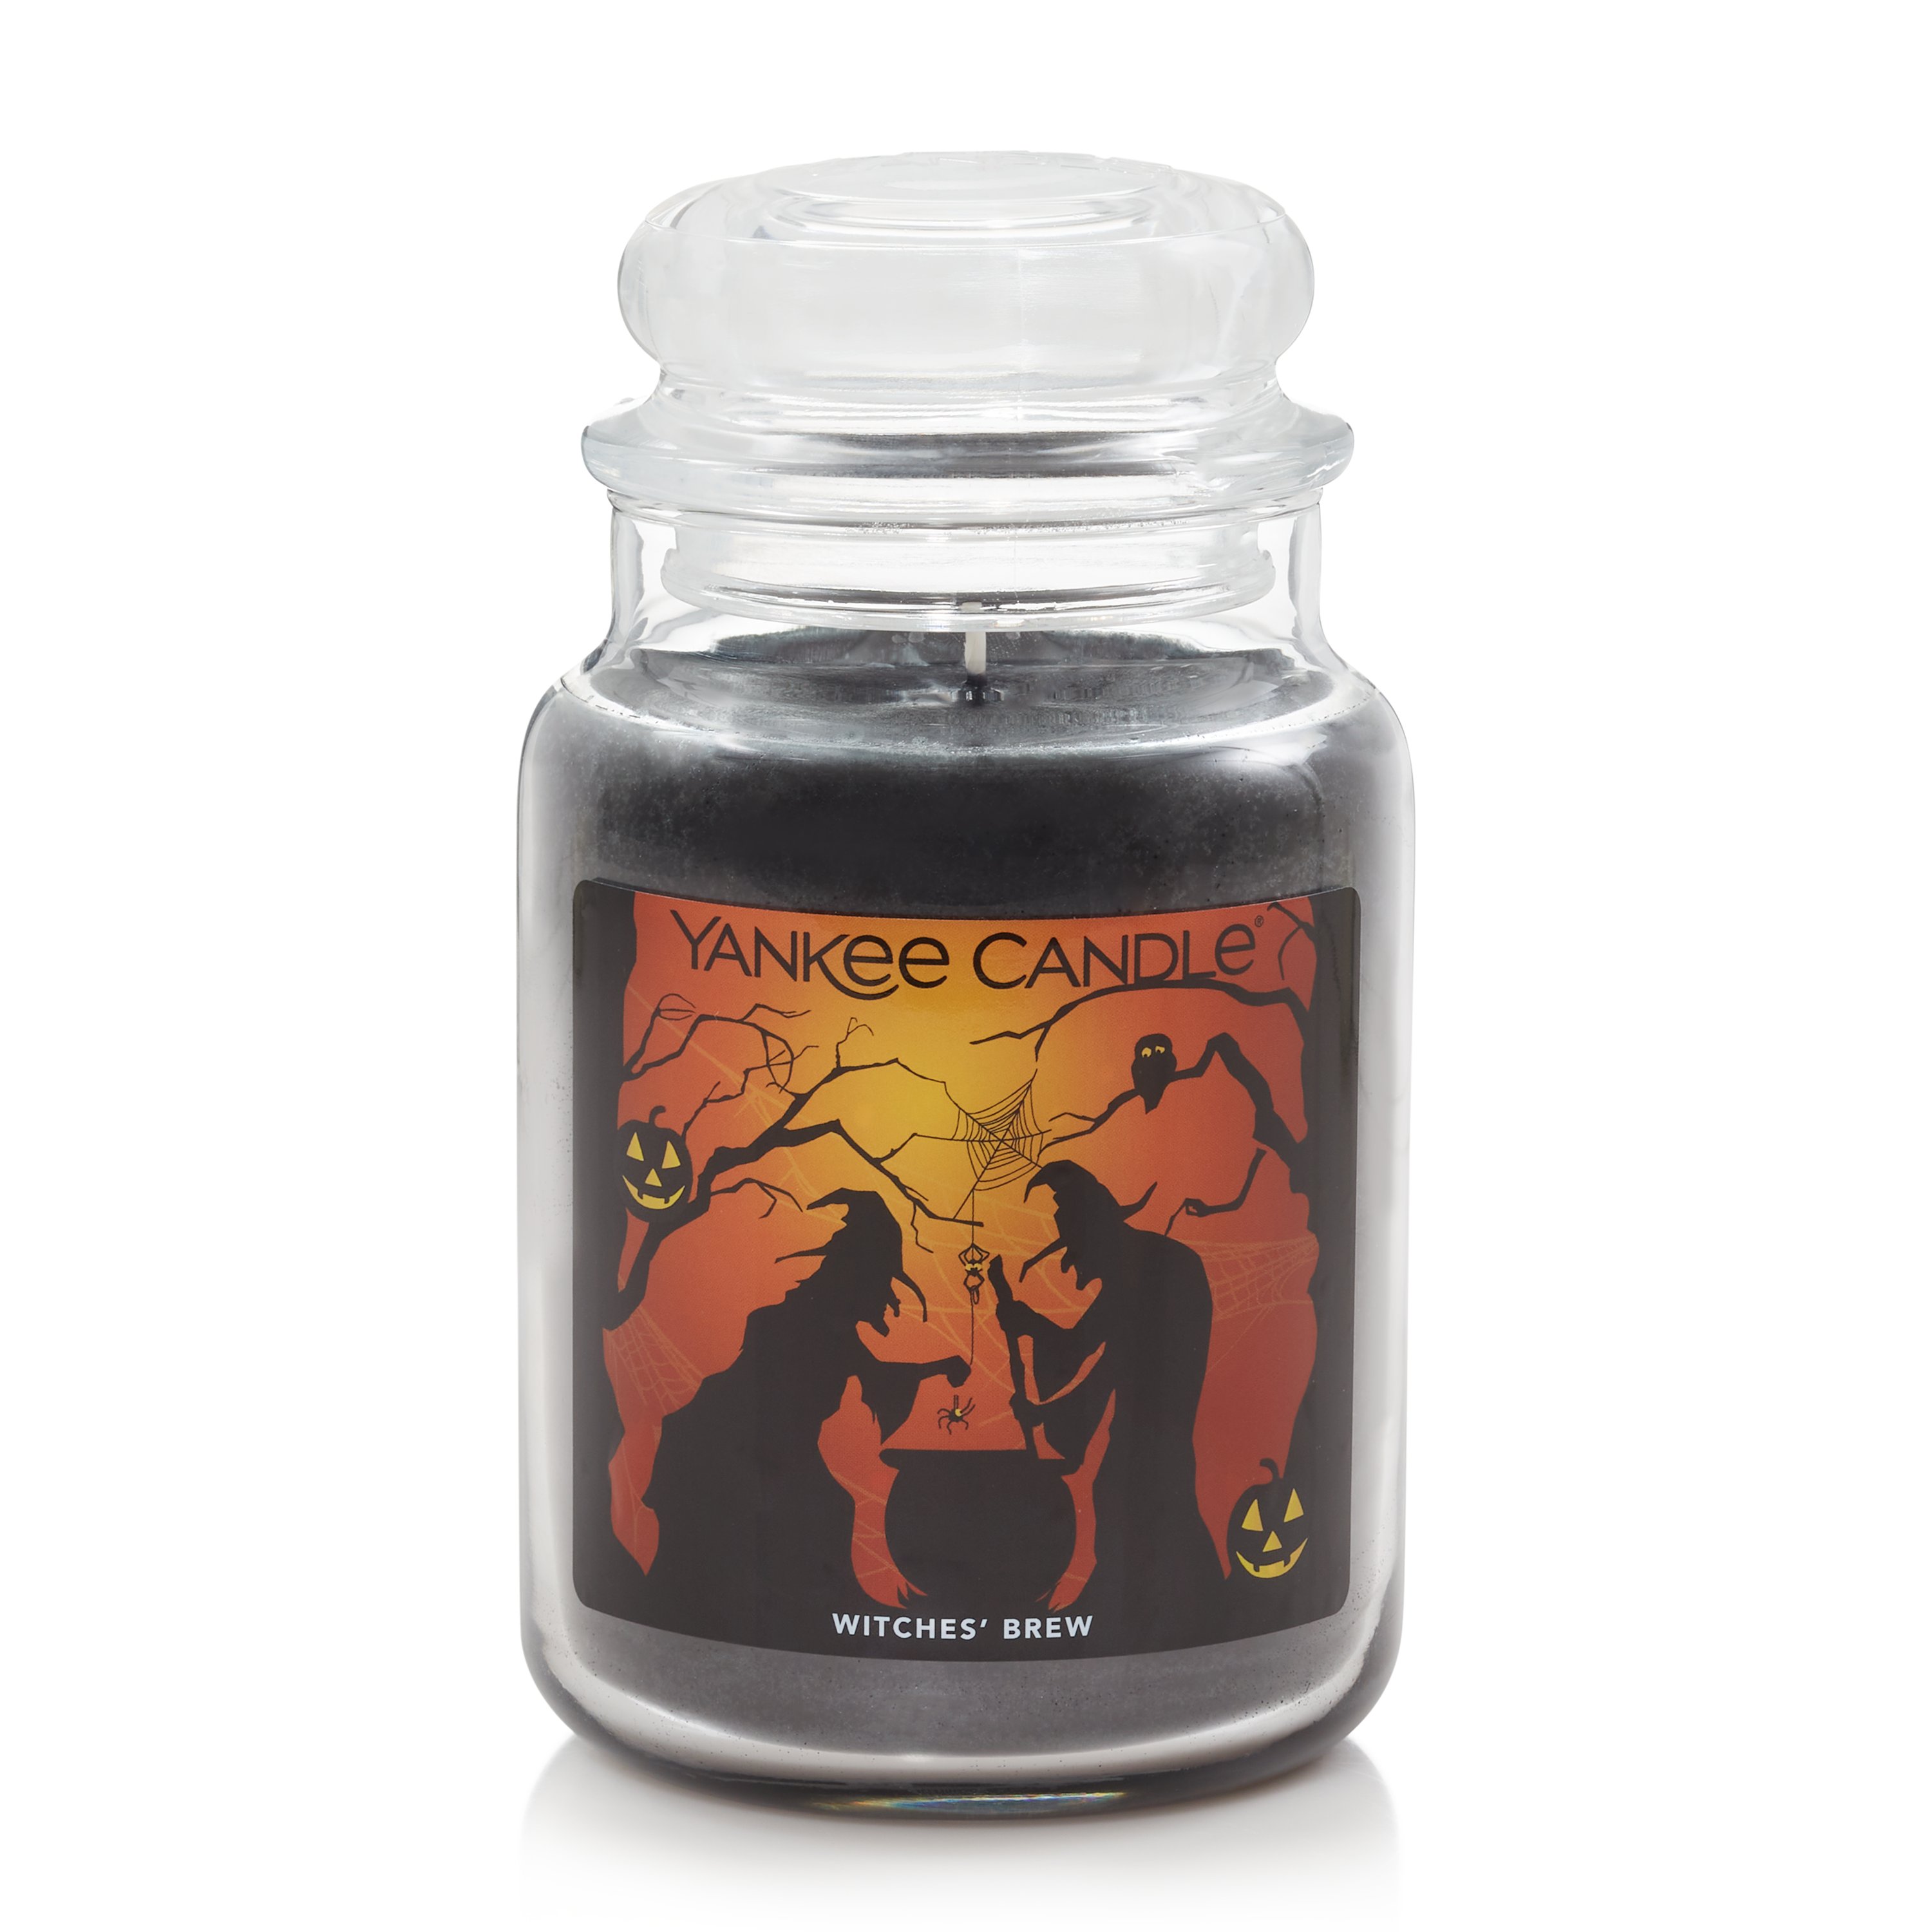 Skip the Fall Candles This Season, and Shop These Halloween